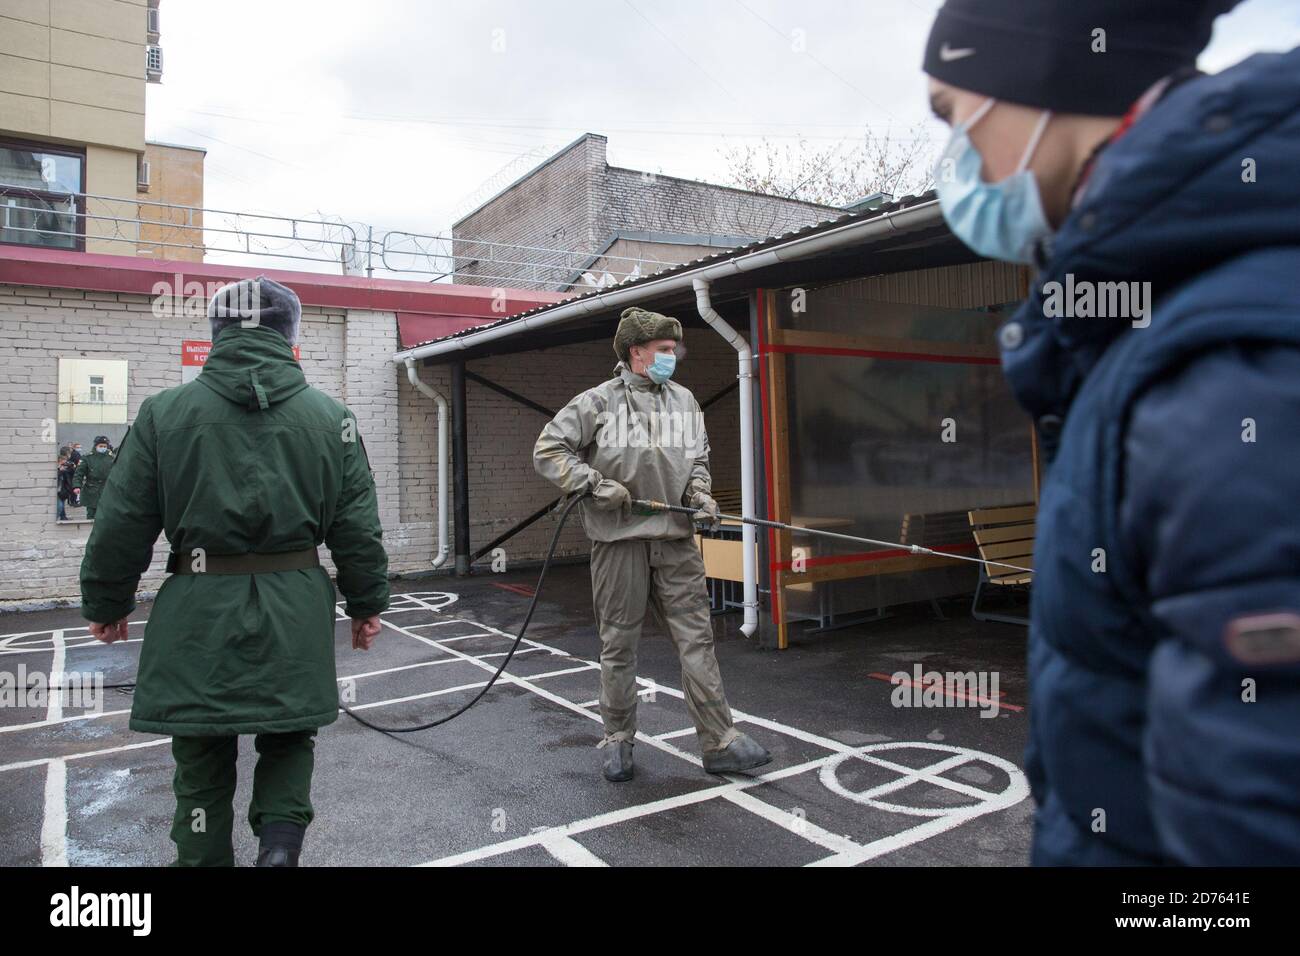 St. Petersburg, Russia. 20th Oct, 2020. A staff member (C) disinfects an army recruitment center in St. Petersburg, Russia, Oct. 20, 2020. Russia's ongoing autumn army recruitment started on Oct. 1 and will last until Dec. 31. In order to be conscripted, candidates must be Russian citizens aged between 18 and 27, and pass a physical examination. Credit: Irina Motina/Xinhua/Alamy Live News Stock Photo